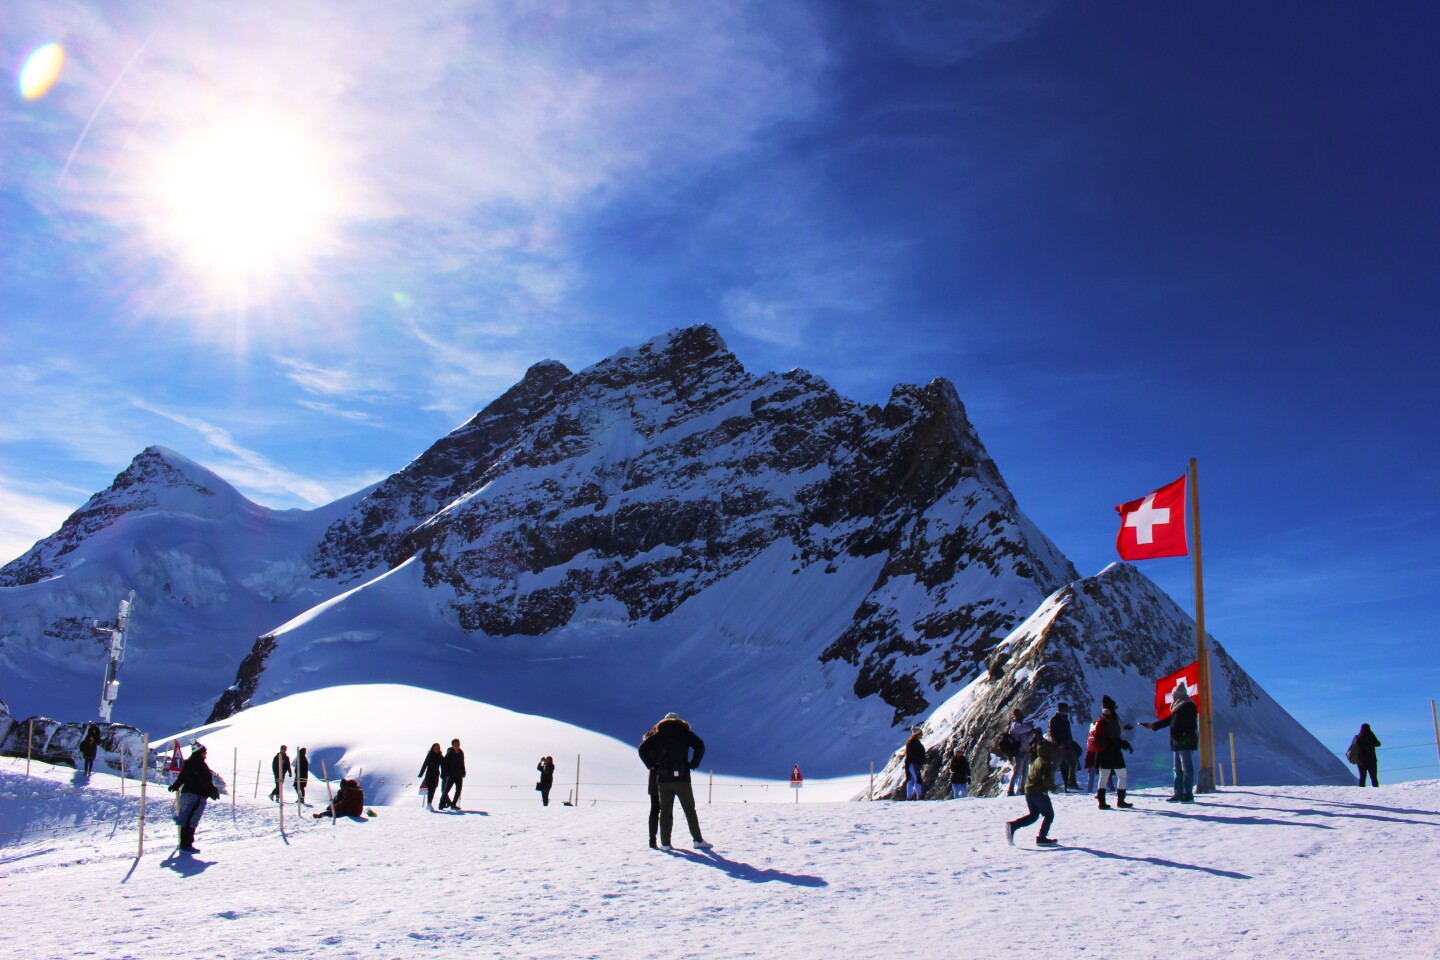 <h2>5. Jungfrau</h2> <ul>   <li><b>Location:</b> Jungfrau, Switzerland</li>   <li><b>Best for: </b>Multi-resort skiing, group ski trips with nonskiers, fondue fans </li>   <li><b>Where to stay:</b> <a class="Link" href="https://bergwelt-grindelwald.com/en/" rel="noopener">Hotel Bergwelt Grindelwald</a>: This 90-room design-centric hotel has epic mountain views and an adults-only spa, where a steam bath, pools, an ice fountain, and a fireplace supply relaxation. The communal lobby restaurant and bar, which serves elevated alpine fare and top cuts of meat.</li>  </ul> <p>For an electrifying skiing experience, few destinations compare with Jungfrau, in the heart of the Swiss Alps. The region comprises four separate ski hills, <a class="Link" href="https://www.jungfrau.ch/en-gb/grindelwaldfirst/" rel="noopener">Grindelwald-First</a>, <a class="Link" href="https://www.jungfrau.ch/en-gb/jungfrau-ski-region/grindelwald-wengen/" rel="noopener">Grindelwald-Wengen</a>, <a class="Link" href="https://schilthorn.ch/" rel="noopener">Mürren-Schilthorn</a>, and <a class="Link" href="https://www.meiringen-hasliberg.ch/en/Welcome" rel="noopener">Meiringen-Hasliberg</a>, making it a lesser-known but ideal European ski destination for groups of skiers of varying abilities.</p> <p>For more advanced skiers, the area offers the famous “Lauberhorn” downhill run in Wengen, one of the longest and most demanding in World Cup ski racing. Ample backcountry skiing opportunities await as well, plus a number of scenic <a class="Link" href="https://www.jungfrau.ch/en-gb/winter-hiking/#filter=r-fullyTranslatedLangus-&zc=12,7.97247,46.60906" rel="noopener">winter hikes and sledding</a>, making Jungfrau appealing to nonskiers, too. In addition to rejuvenating Swiss health wellness centers and spas, Jungfrau is home to <a class="Link" href="https://www.jungfrau.ch/en-gb/jungfraujoch-top-of-europe/" rel="noopener">Jungfraujoch</a>, a mountain destination (complete with an ice palace) that’s part of the <a class="Link" href="https://whc.unesco.org/en/list/1037/" rel="noopener">UNESCO-recognized Swiss Alps Jungfrau-Aletsch</a>, à la carte <a class="Link" href="https://www.jungfrau.ch/de-ch/essen-trinken/jungfraujoch/a-la-carte-restaurant-crystal/" rel="noopener">Restaurant Crystal</a>, and panoramic views of the Alps—no skis required.</p>